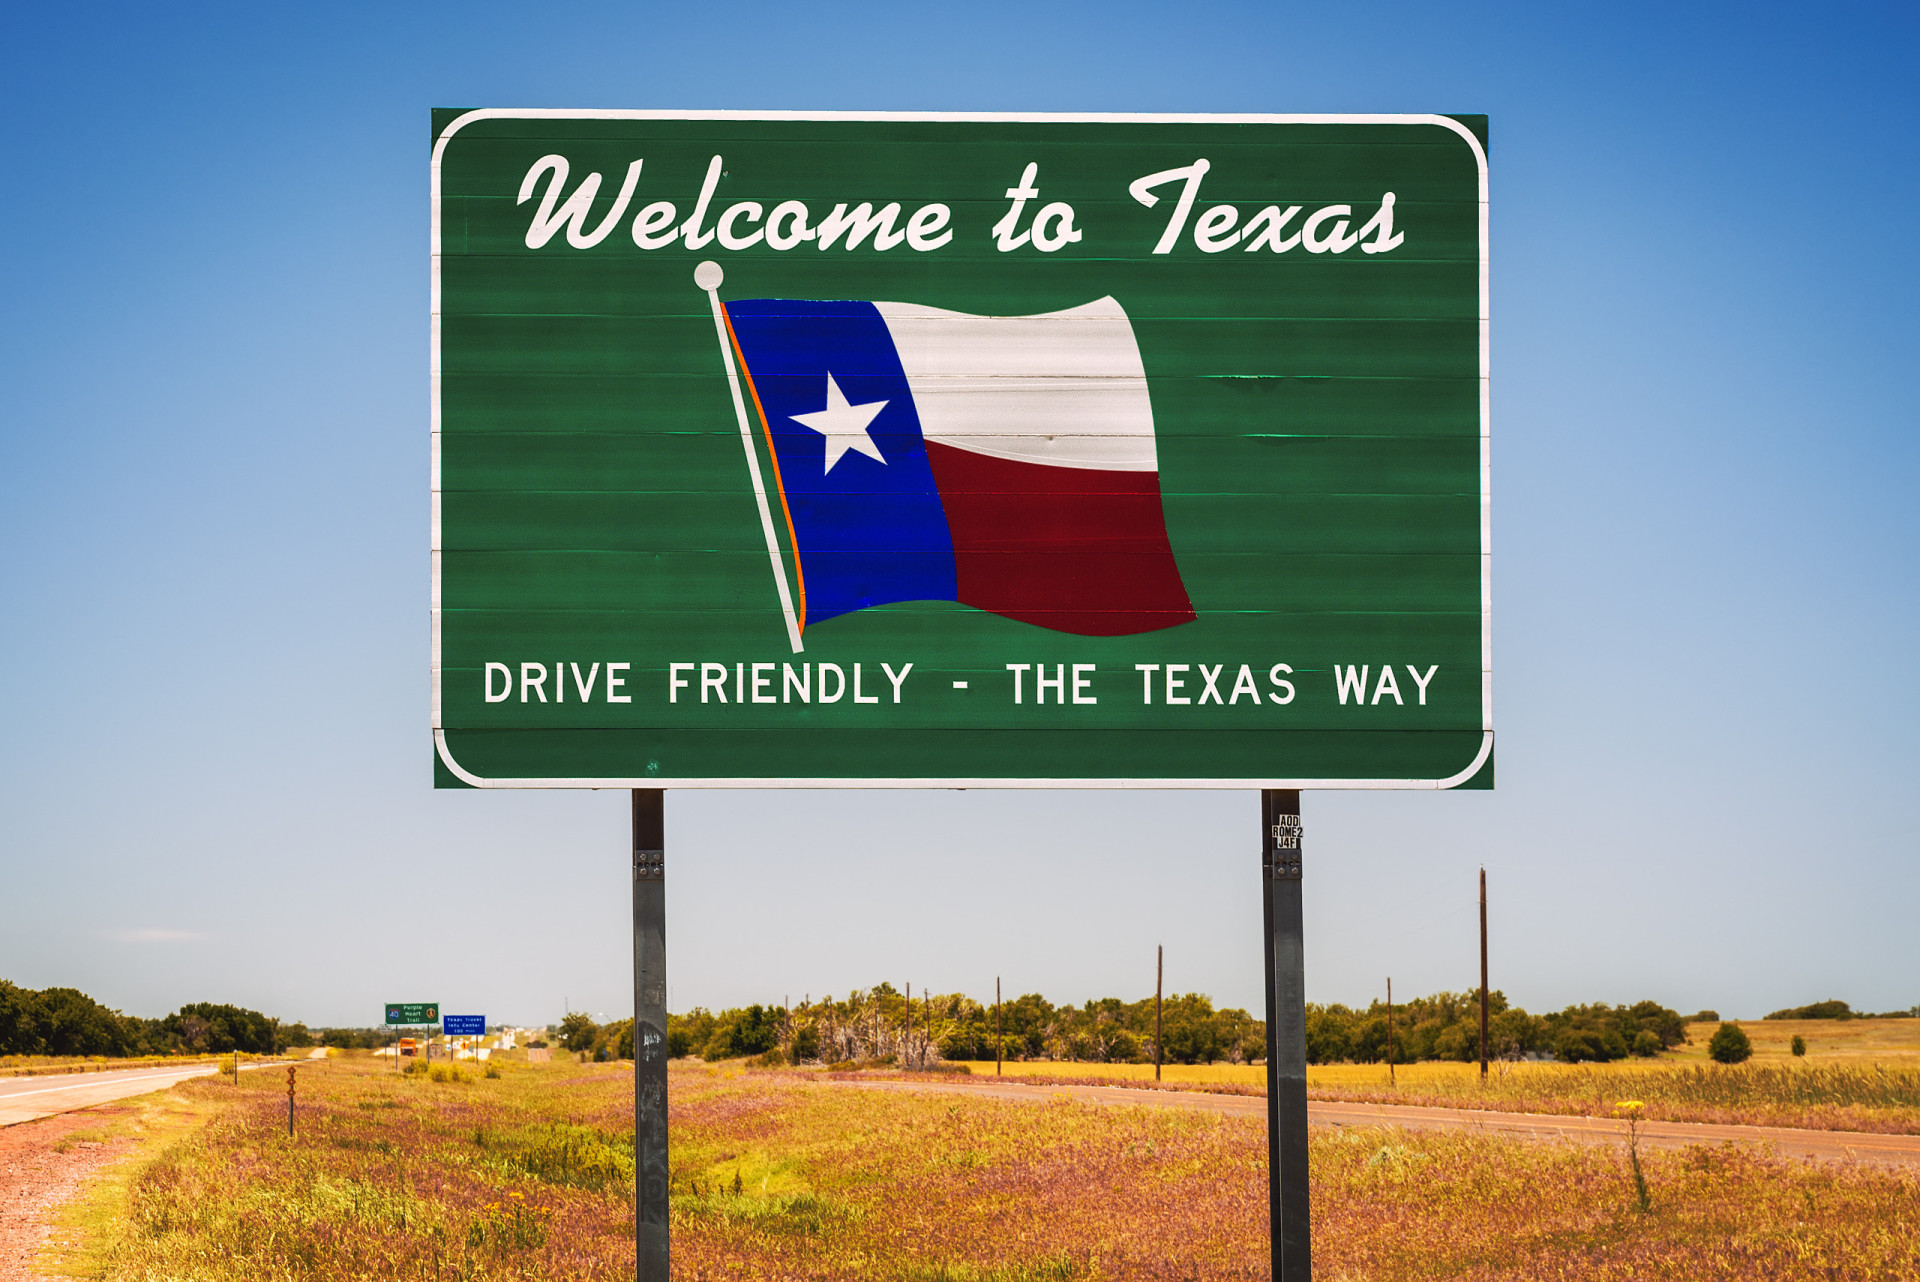 <p>Everything is bigger in Texas, including the state's reminder to drive responsibly as one crosses state lines. </p><p><a href="https://www.msn.com/en-us/community/channel/vid-7xx8mnucu55yw63we9va2gwr7uihbxwc68fxqp25x6tg4ftibpra?cvid=94631541bc0f4f89bfd59158d696ad7e">Follow us and access great exclusive content every day</a></p>